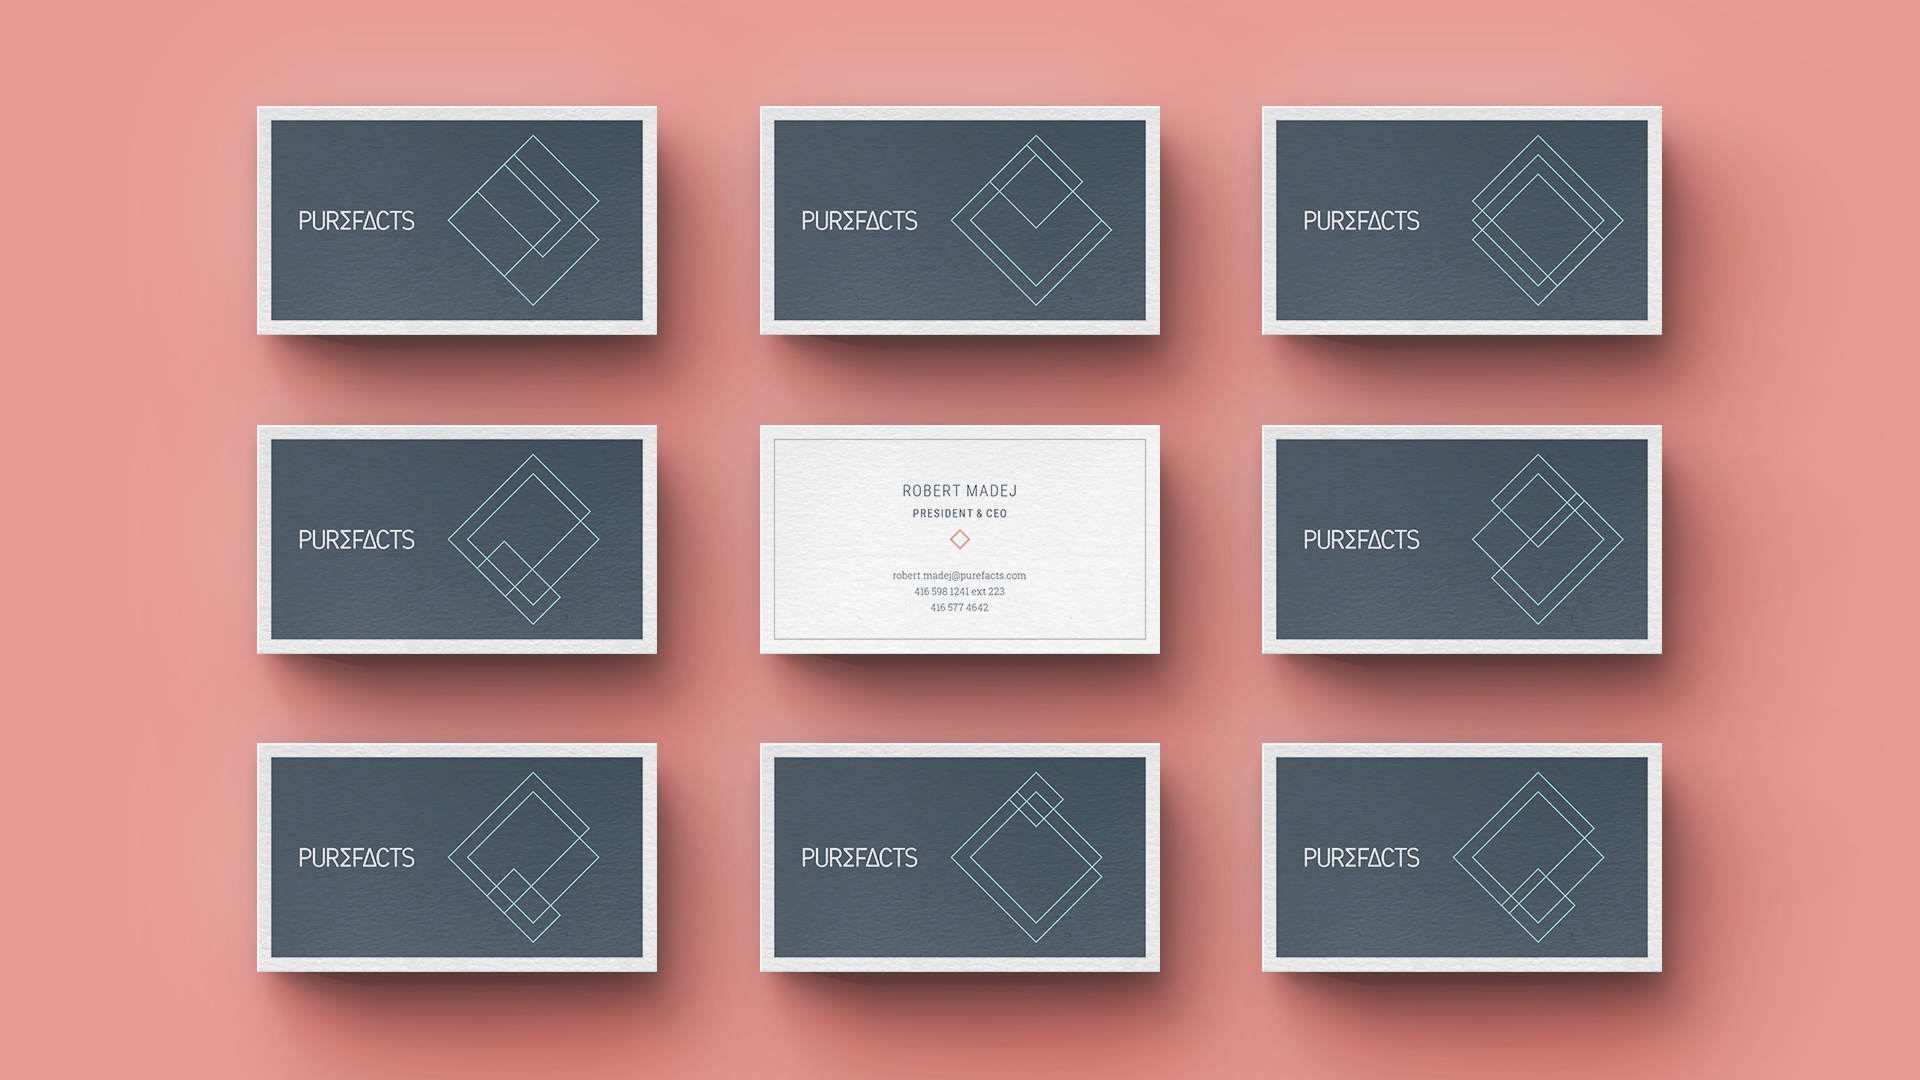 Print collateral business card designs showing secondary branding elements